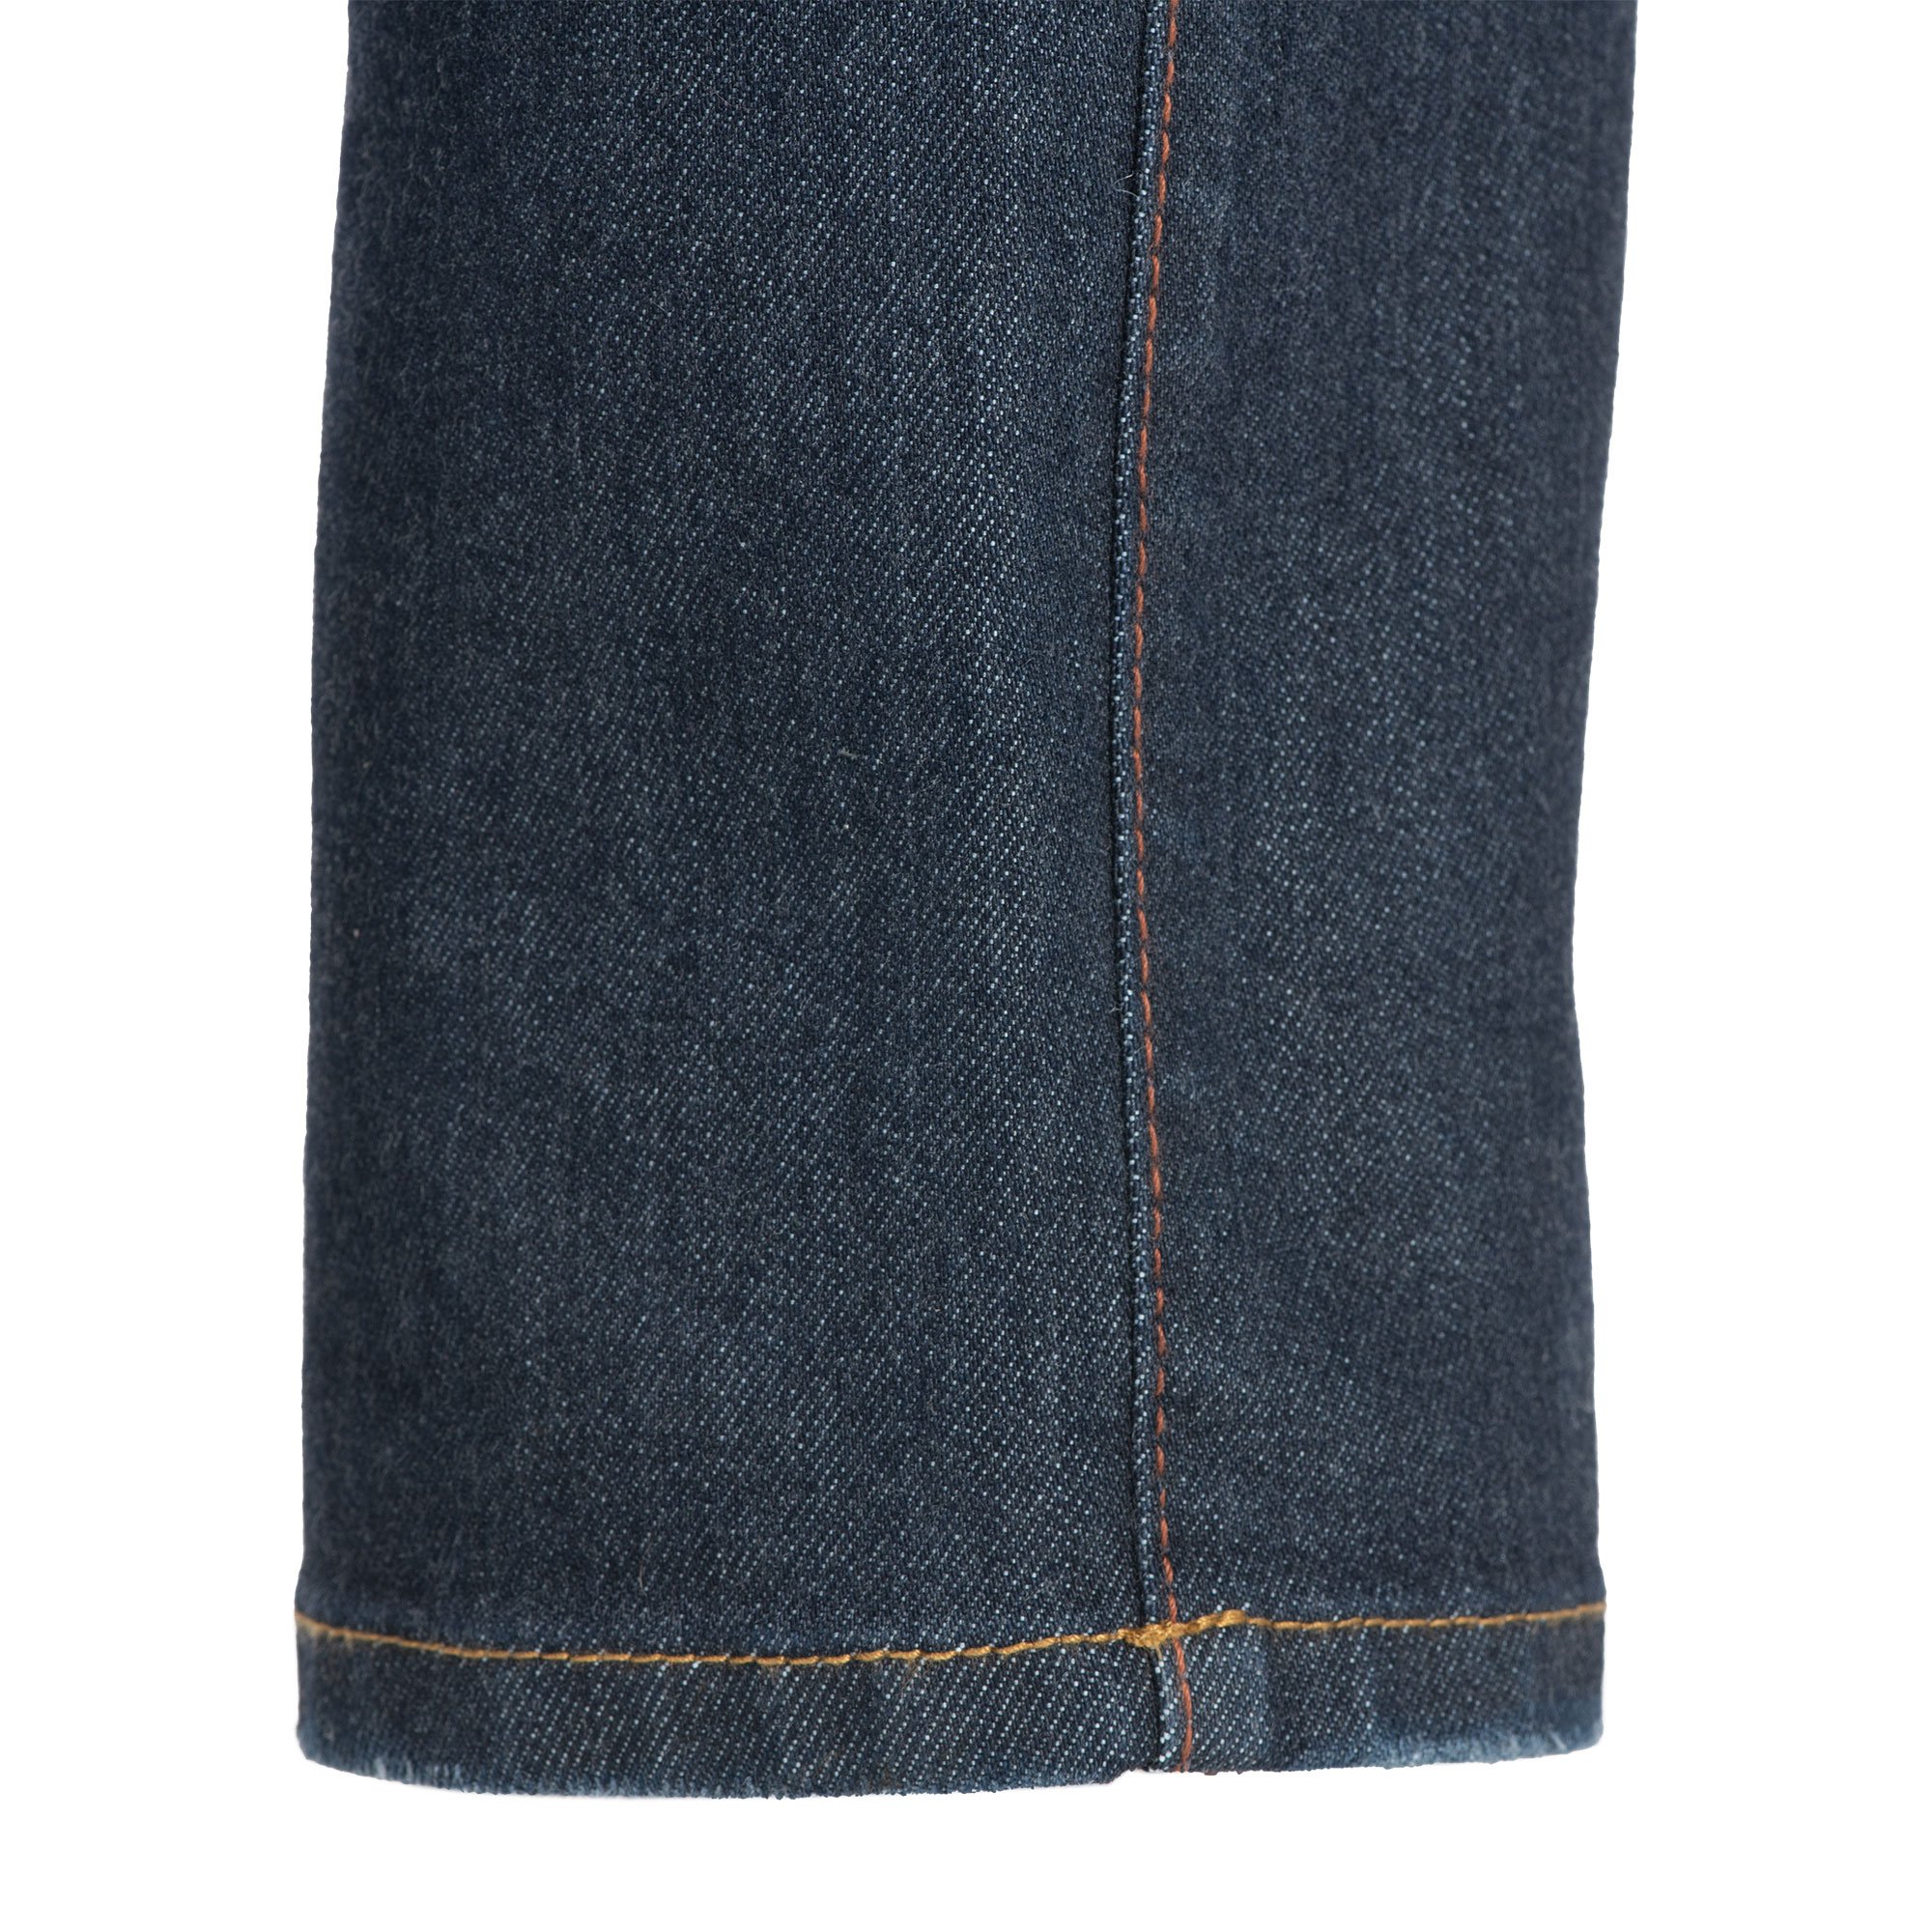 OA AAA Straight MS Jeans Dark Aged S L30 : Oxford Products